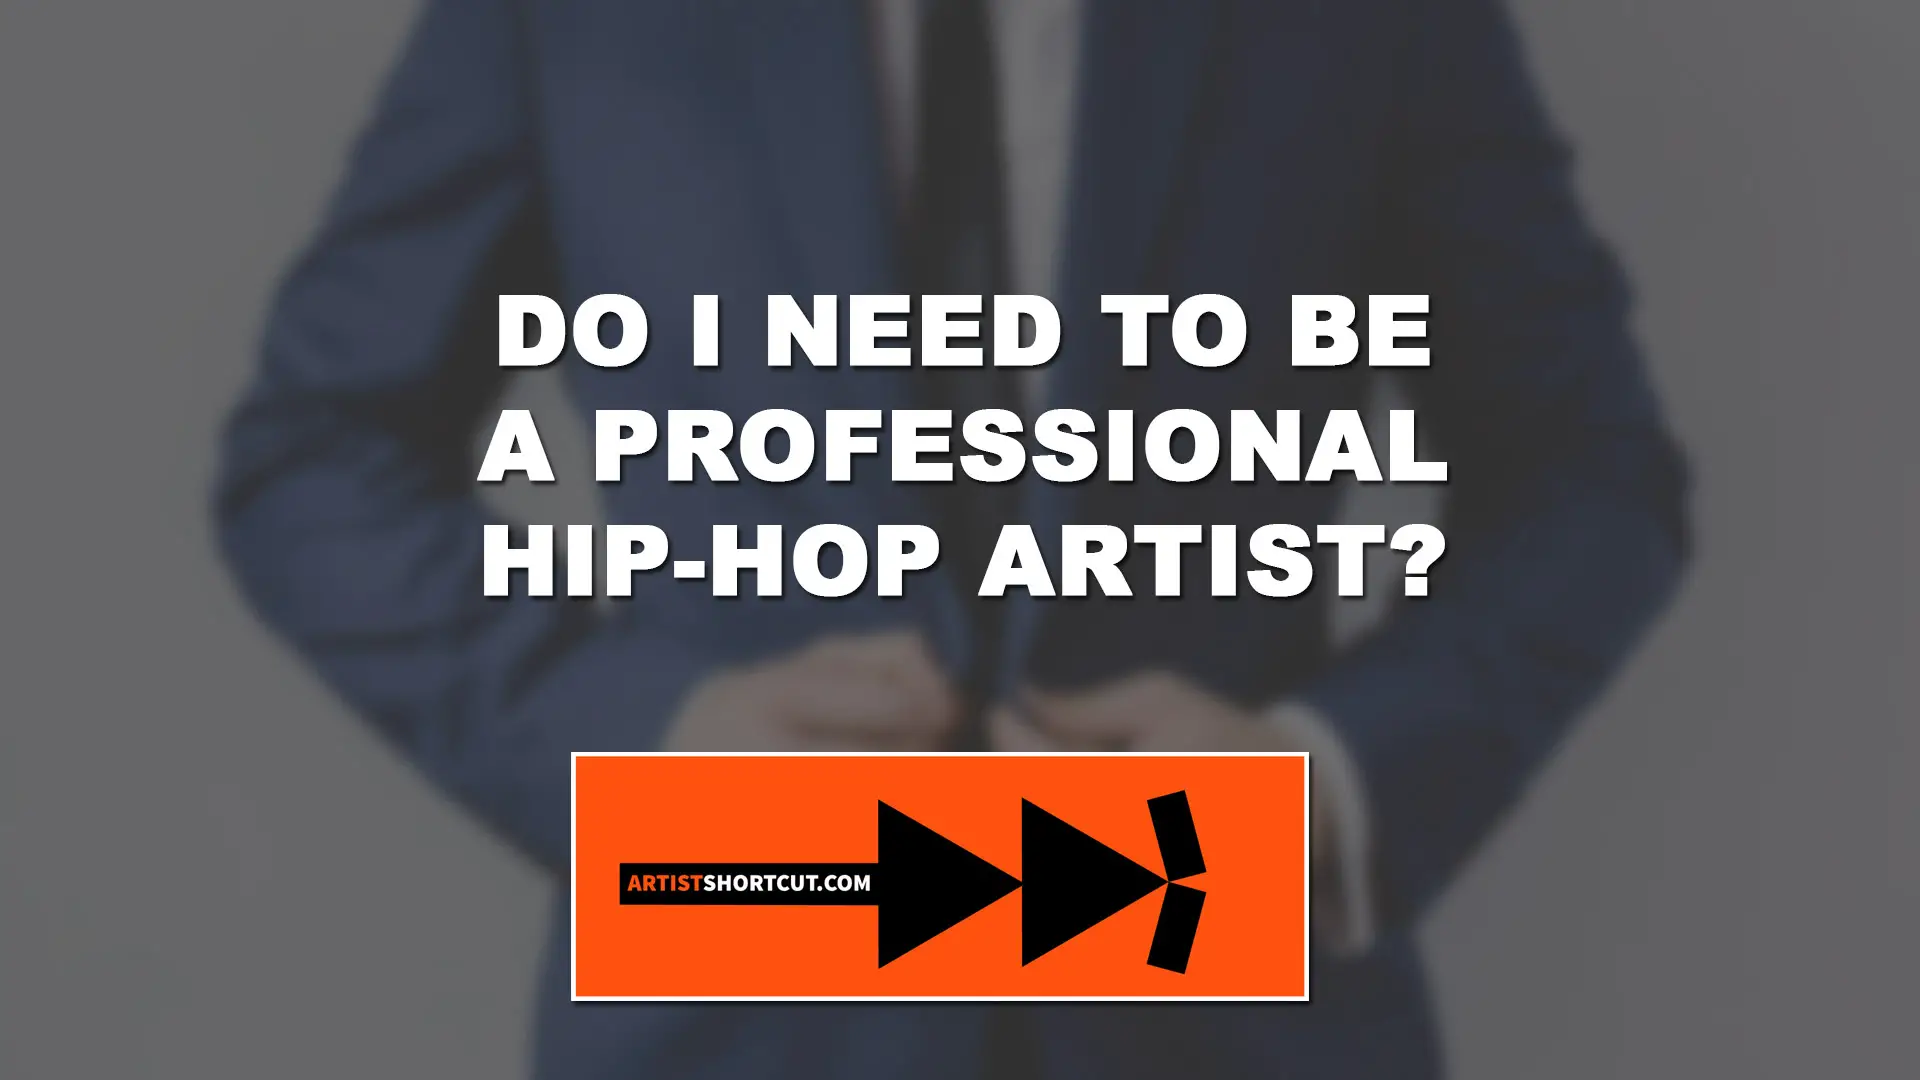 Do I Need To Be A Professional Hip-Hop Artist